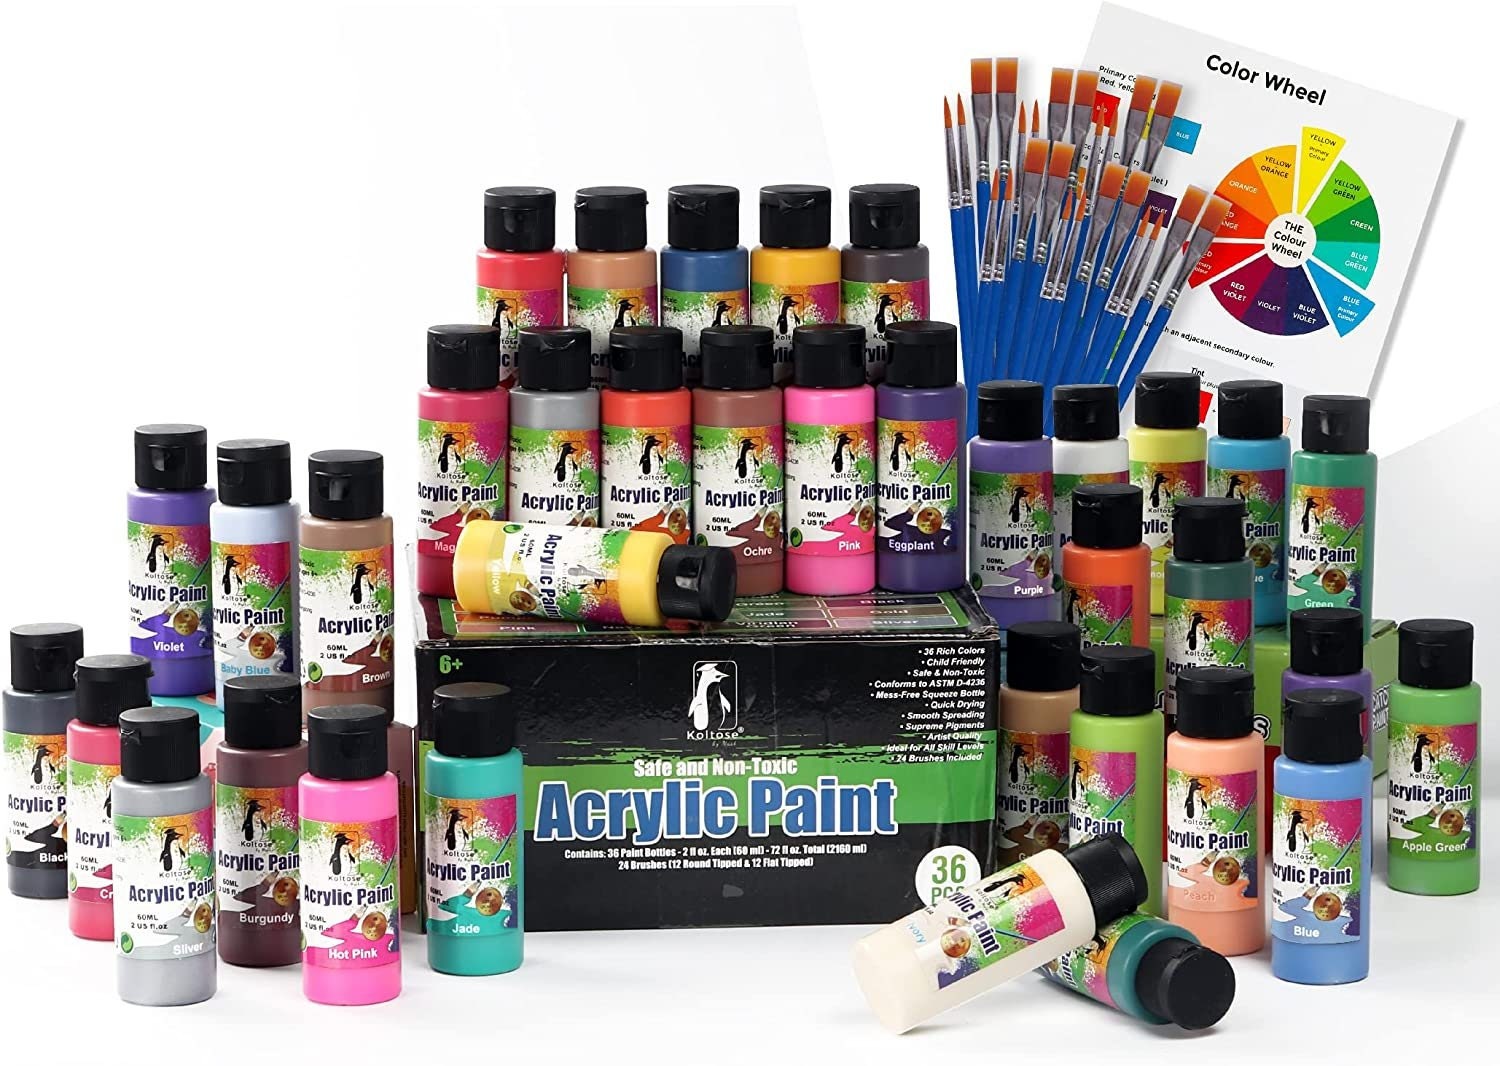 J Mark 48pc Deluxe Painting Kits for Adults - Includes Adjustable Wood Easel, Thick Canvases, Acrylic Paints, Brushes Set,Wooden and Plastic